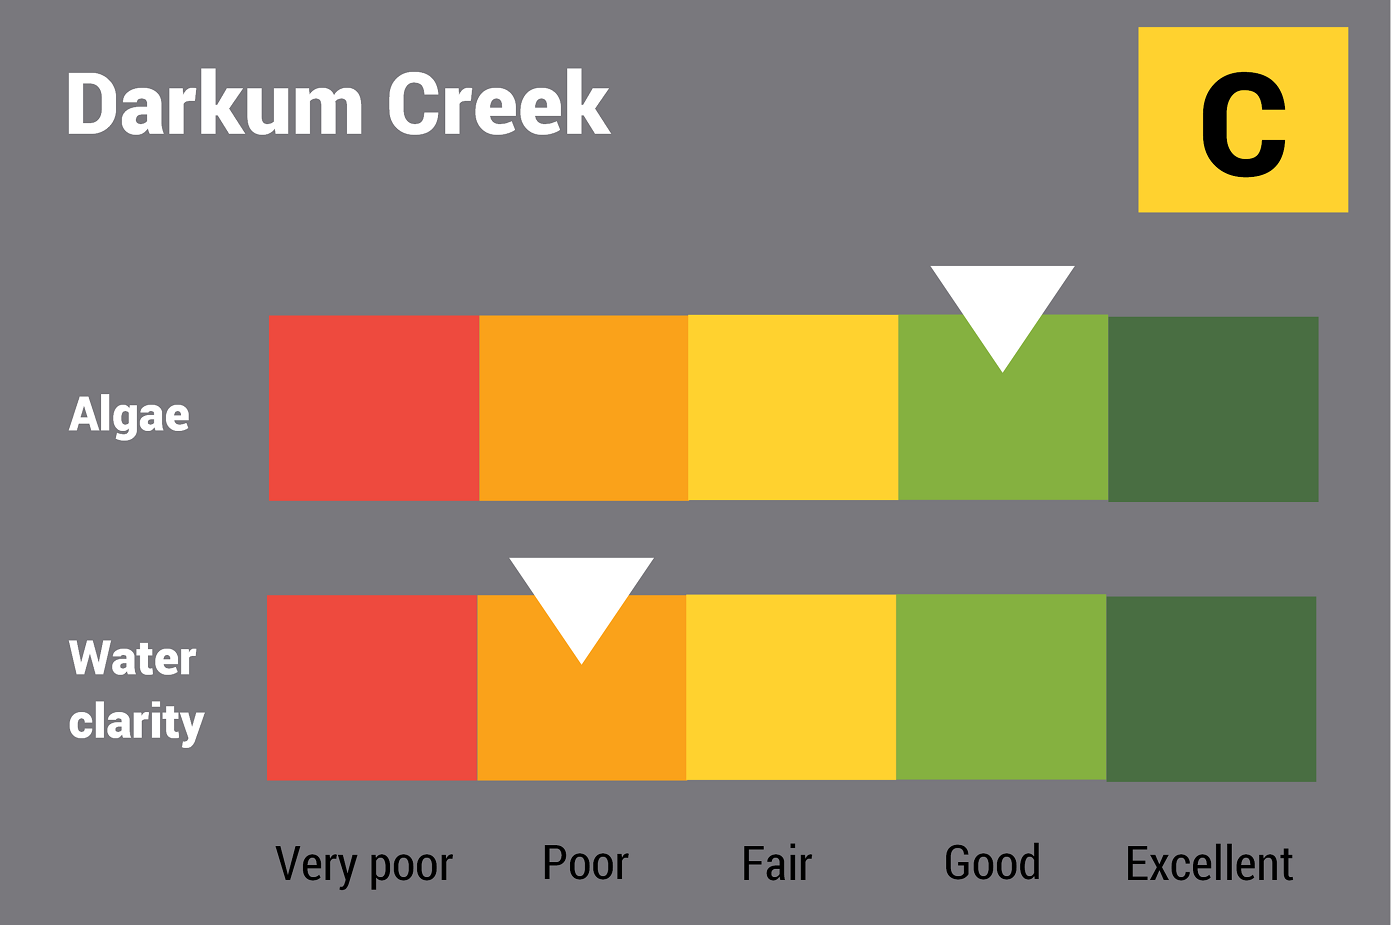 Darkum Creek water quality report card for algae and water clarity showing colour-coded ratings (red, orange, yellow, light green and dark green, which represent very poor, poor, fair, good and excellent, respectively). Algae is rated 'good' and water clarity is rated 'poor' giving an overall rating of 'fair' or 'C'.